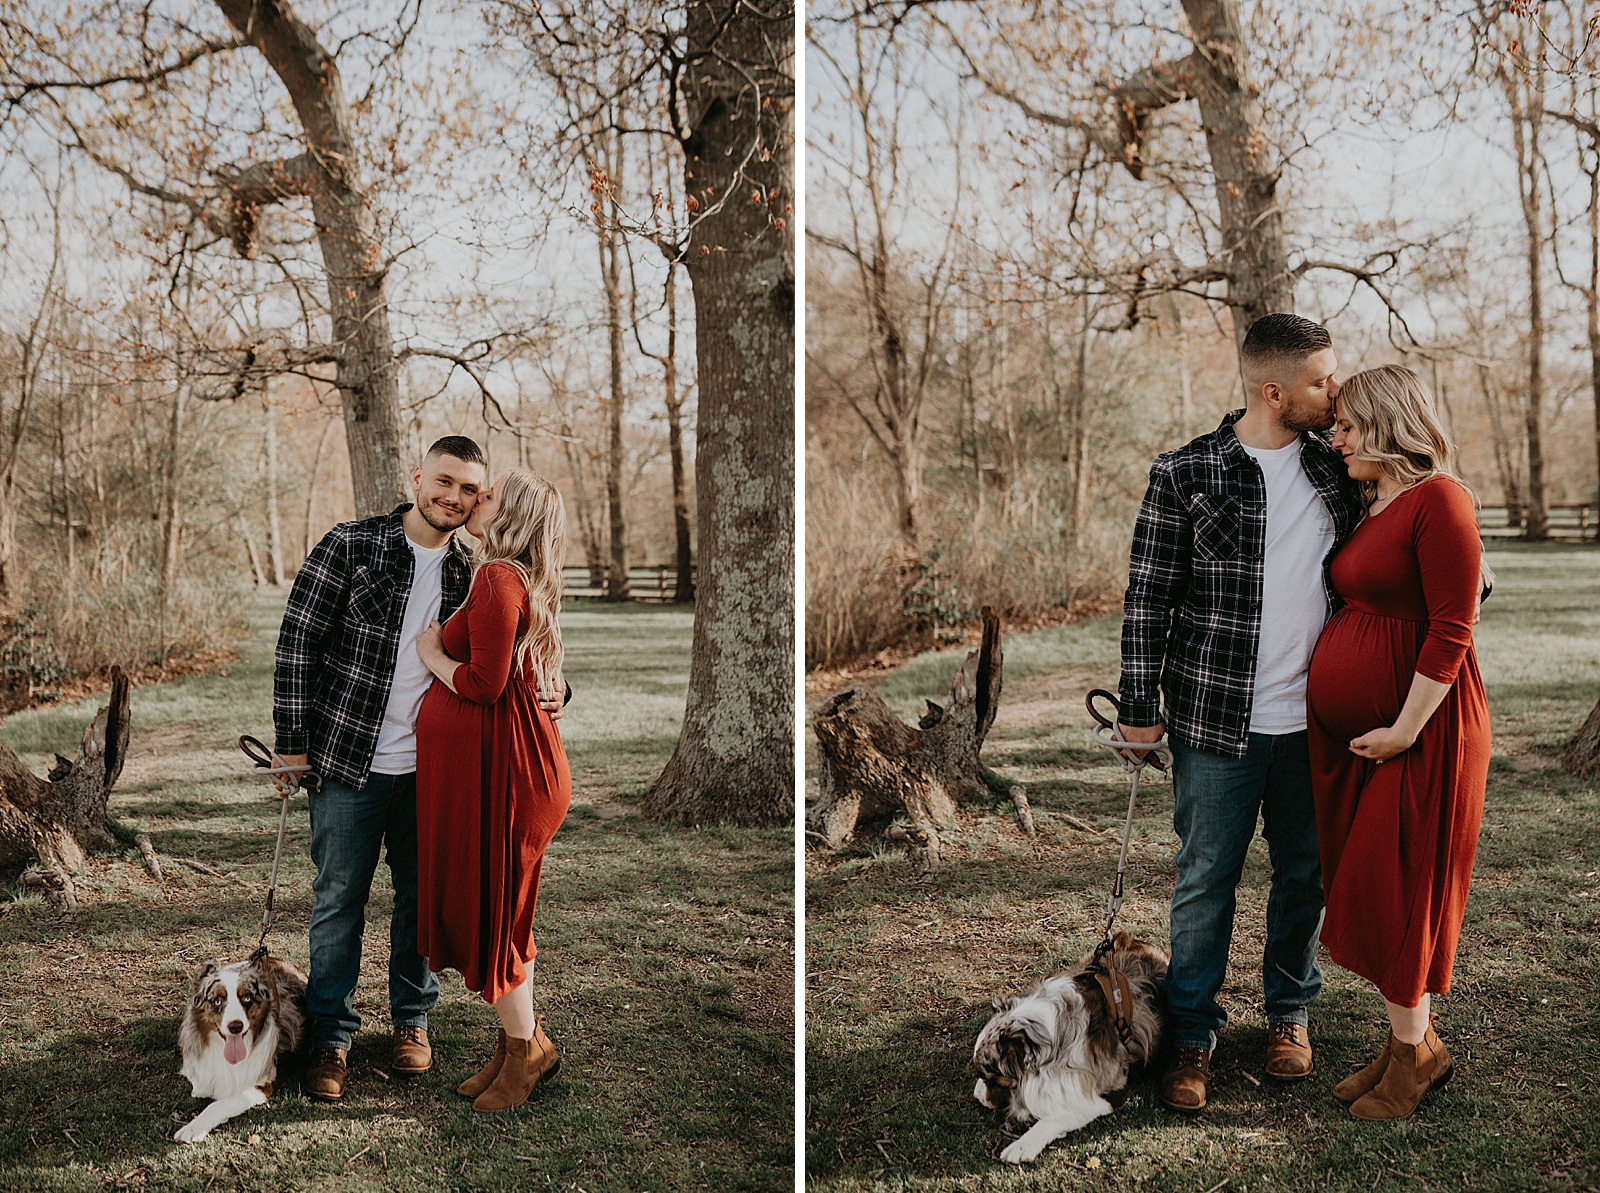 Pregnant woman kissing man on the cheek out in the forest with man holding leash for dog